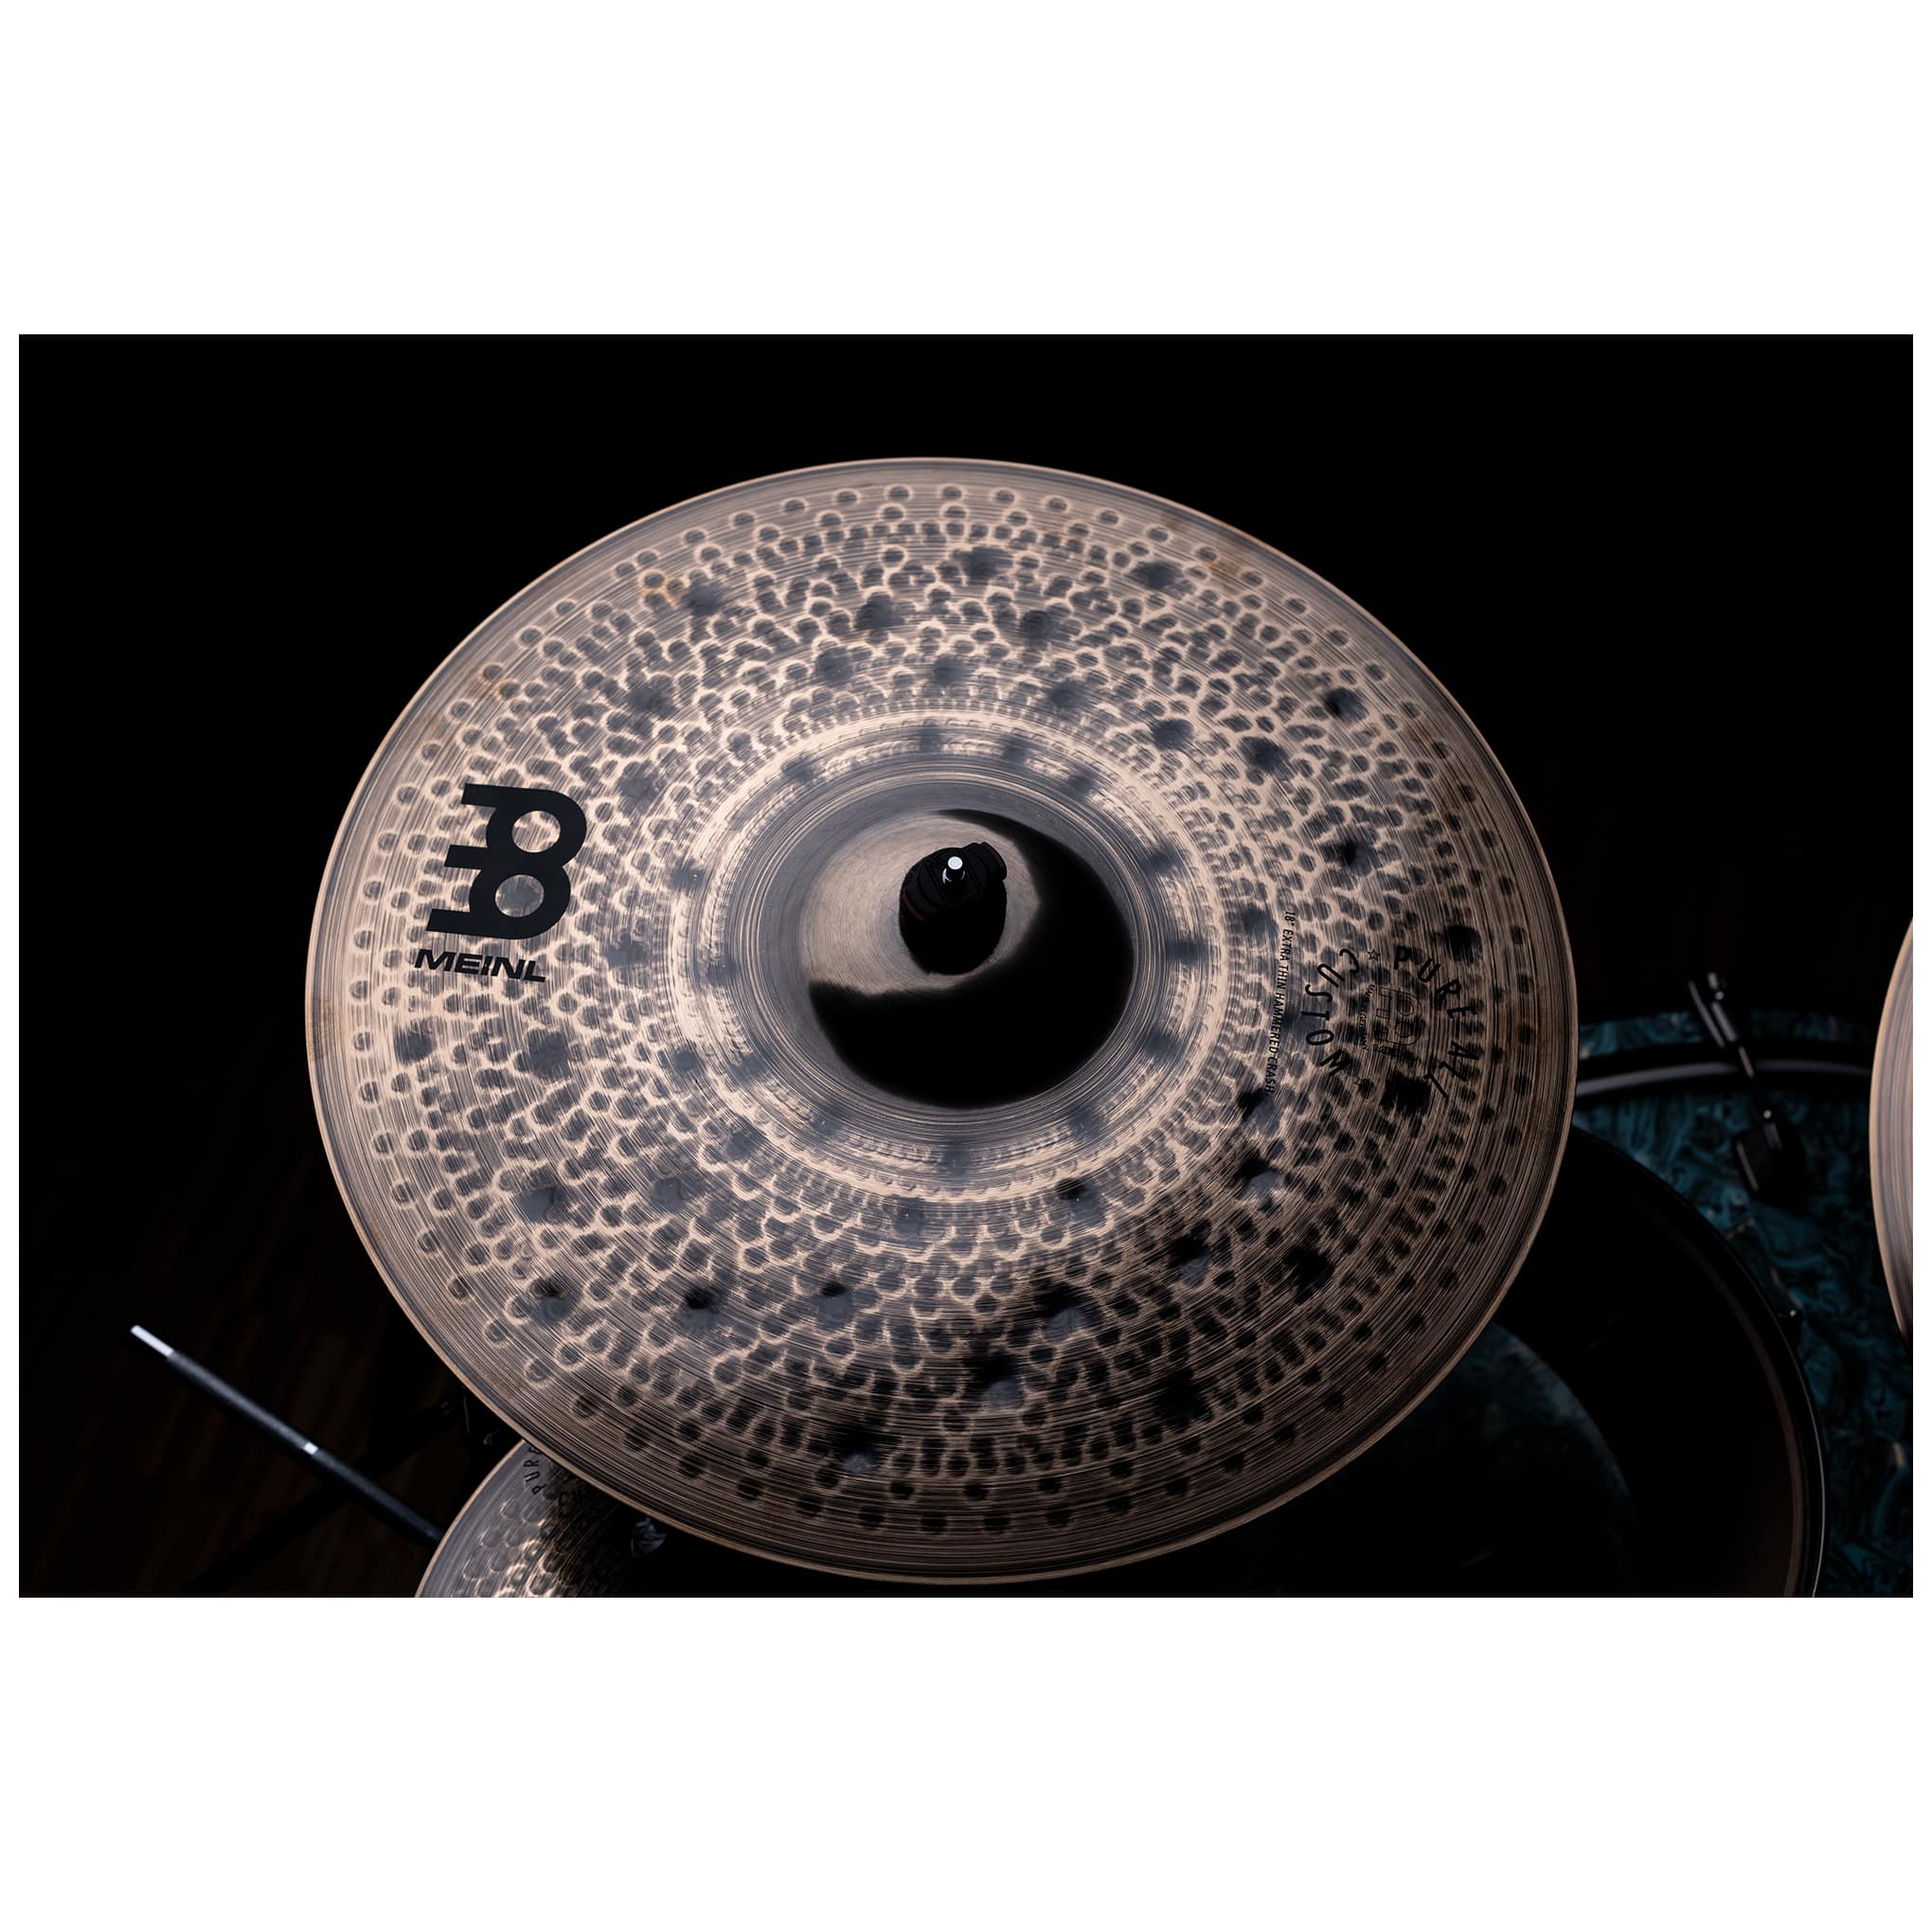 Meinl Cymbals PAC18ETHC - 18" Pure Alloy Custom Extra Thin Hammered Crash 6